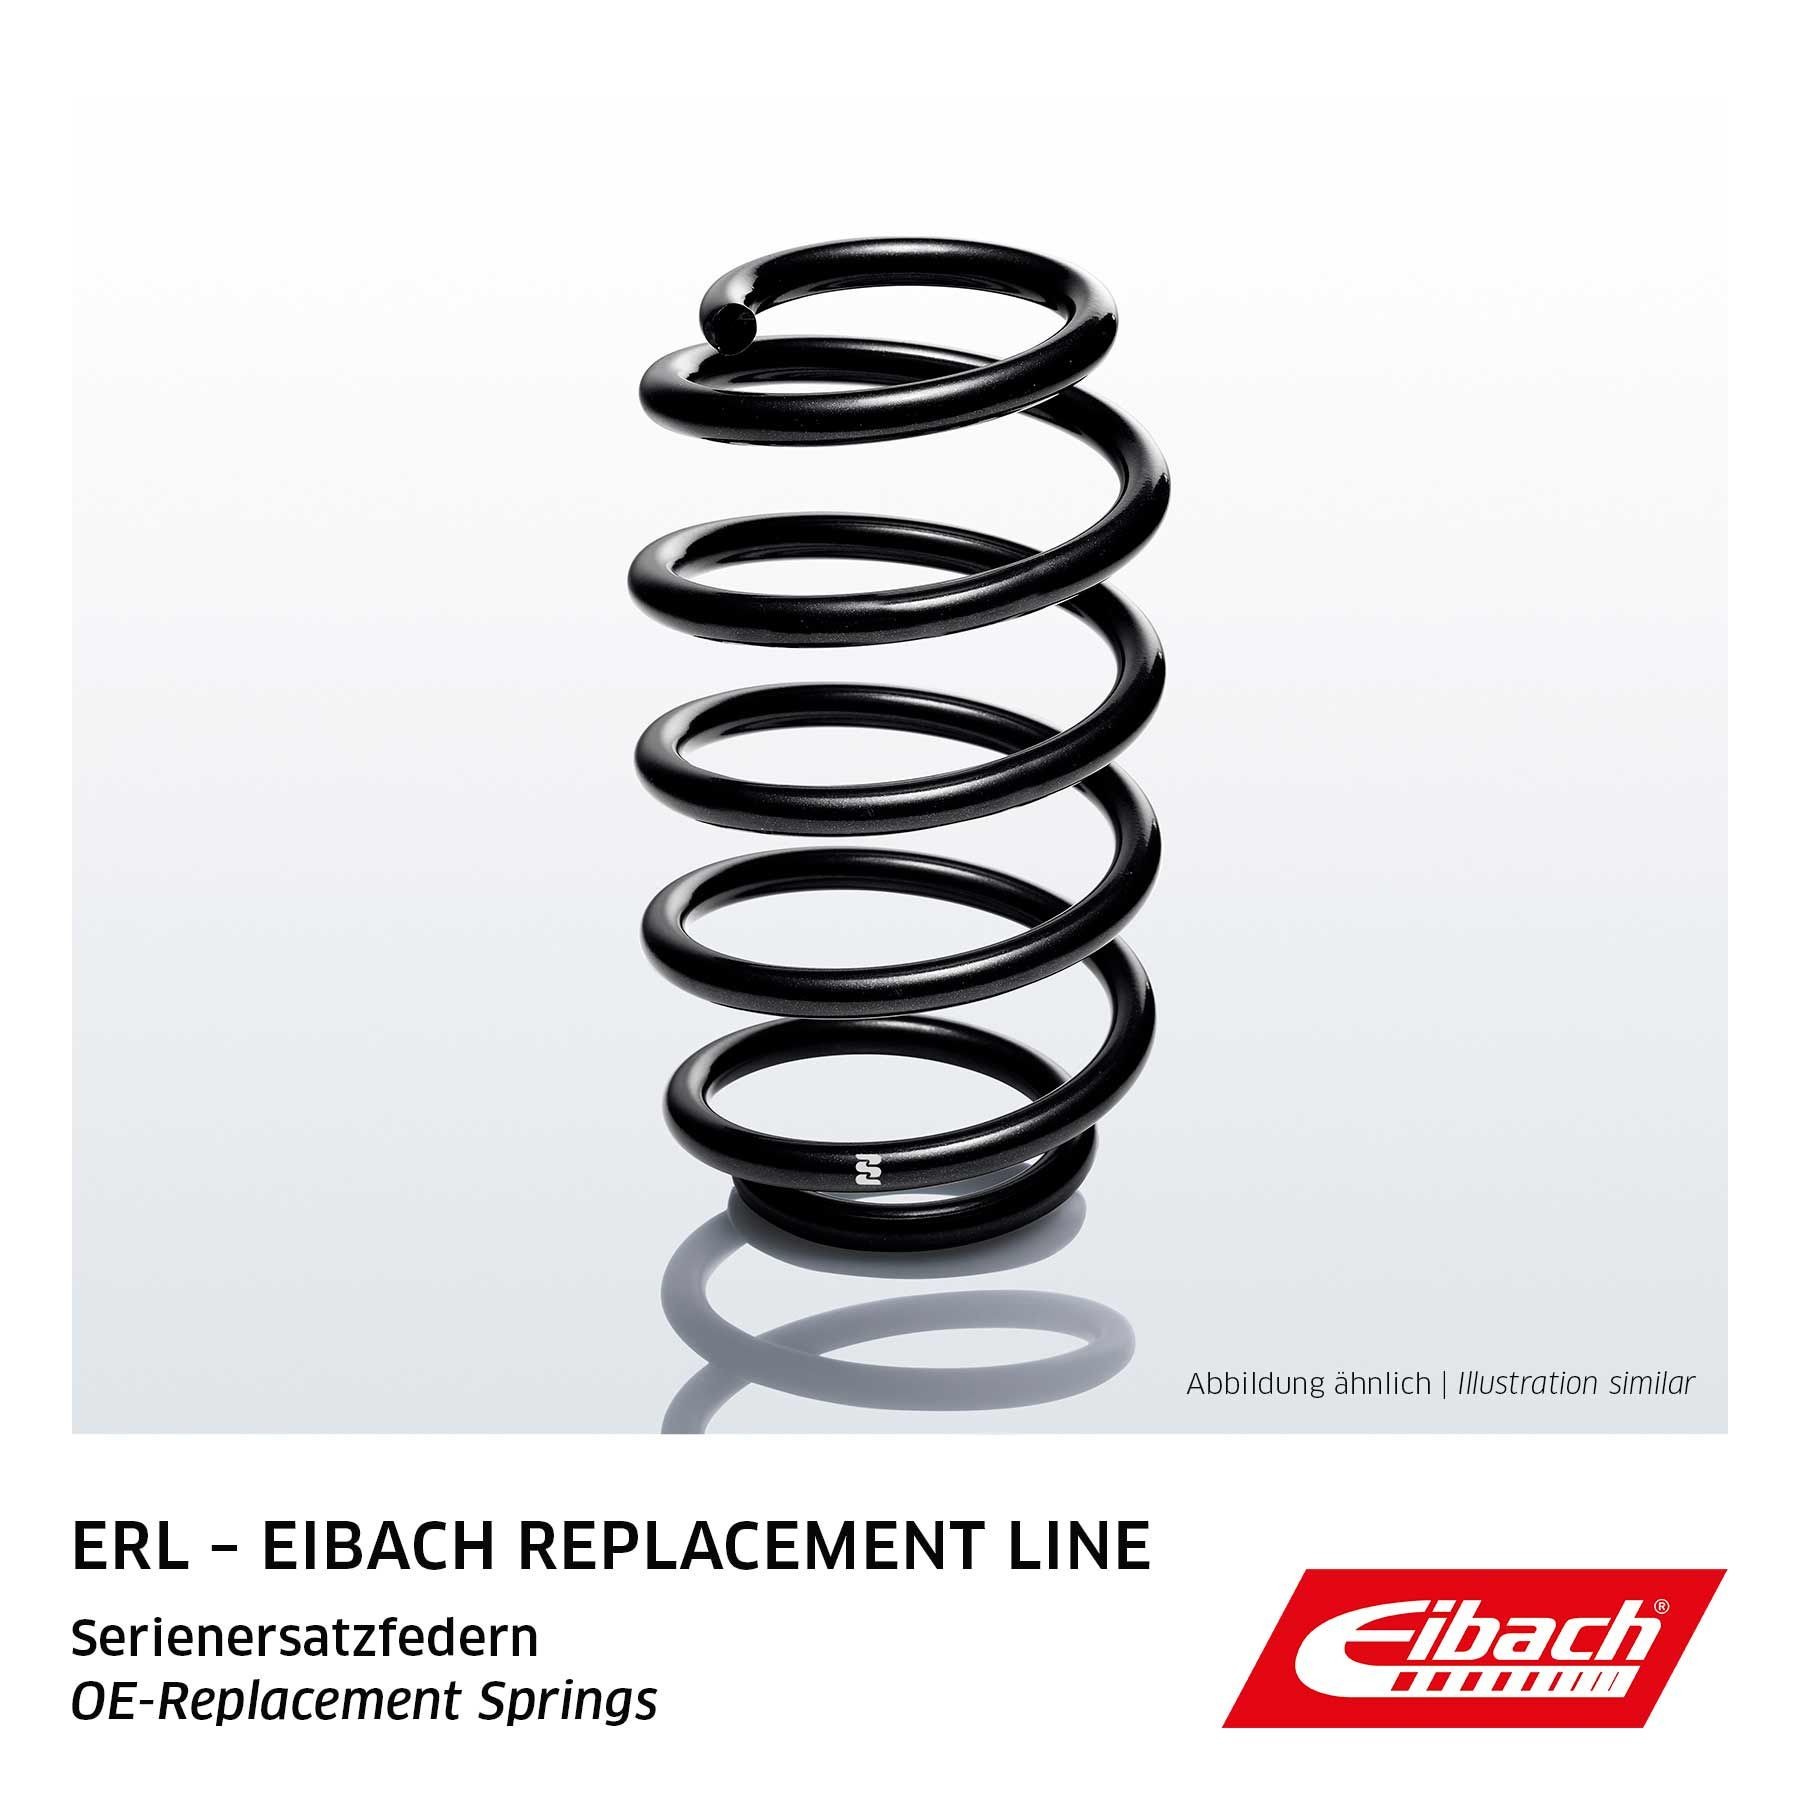 R10122 Coil spring R10122 EIBACH Rear Axle, Coil Spring, for vehicles with standard suspension